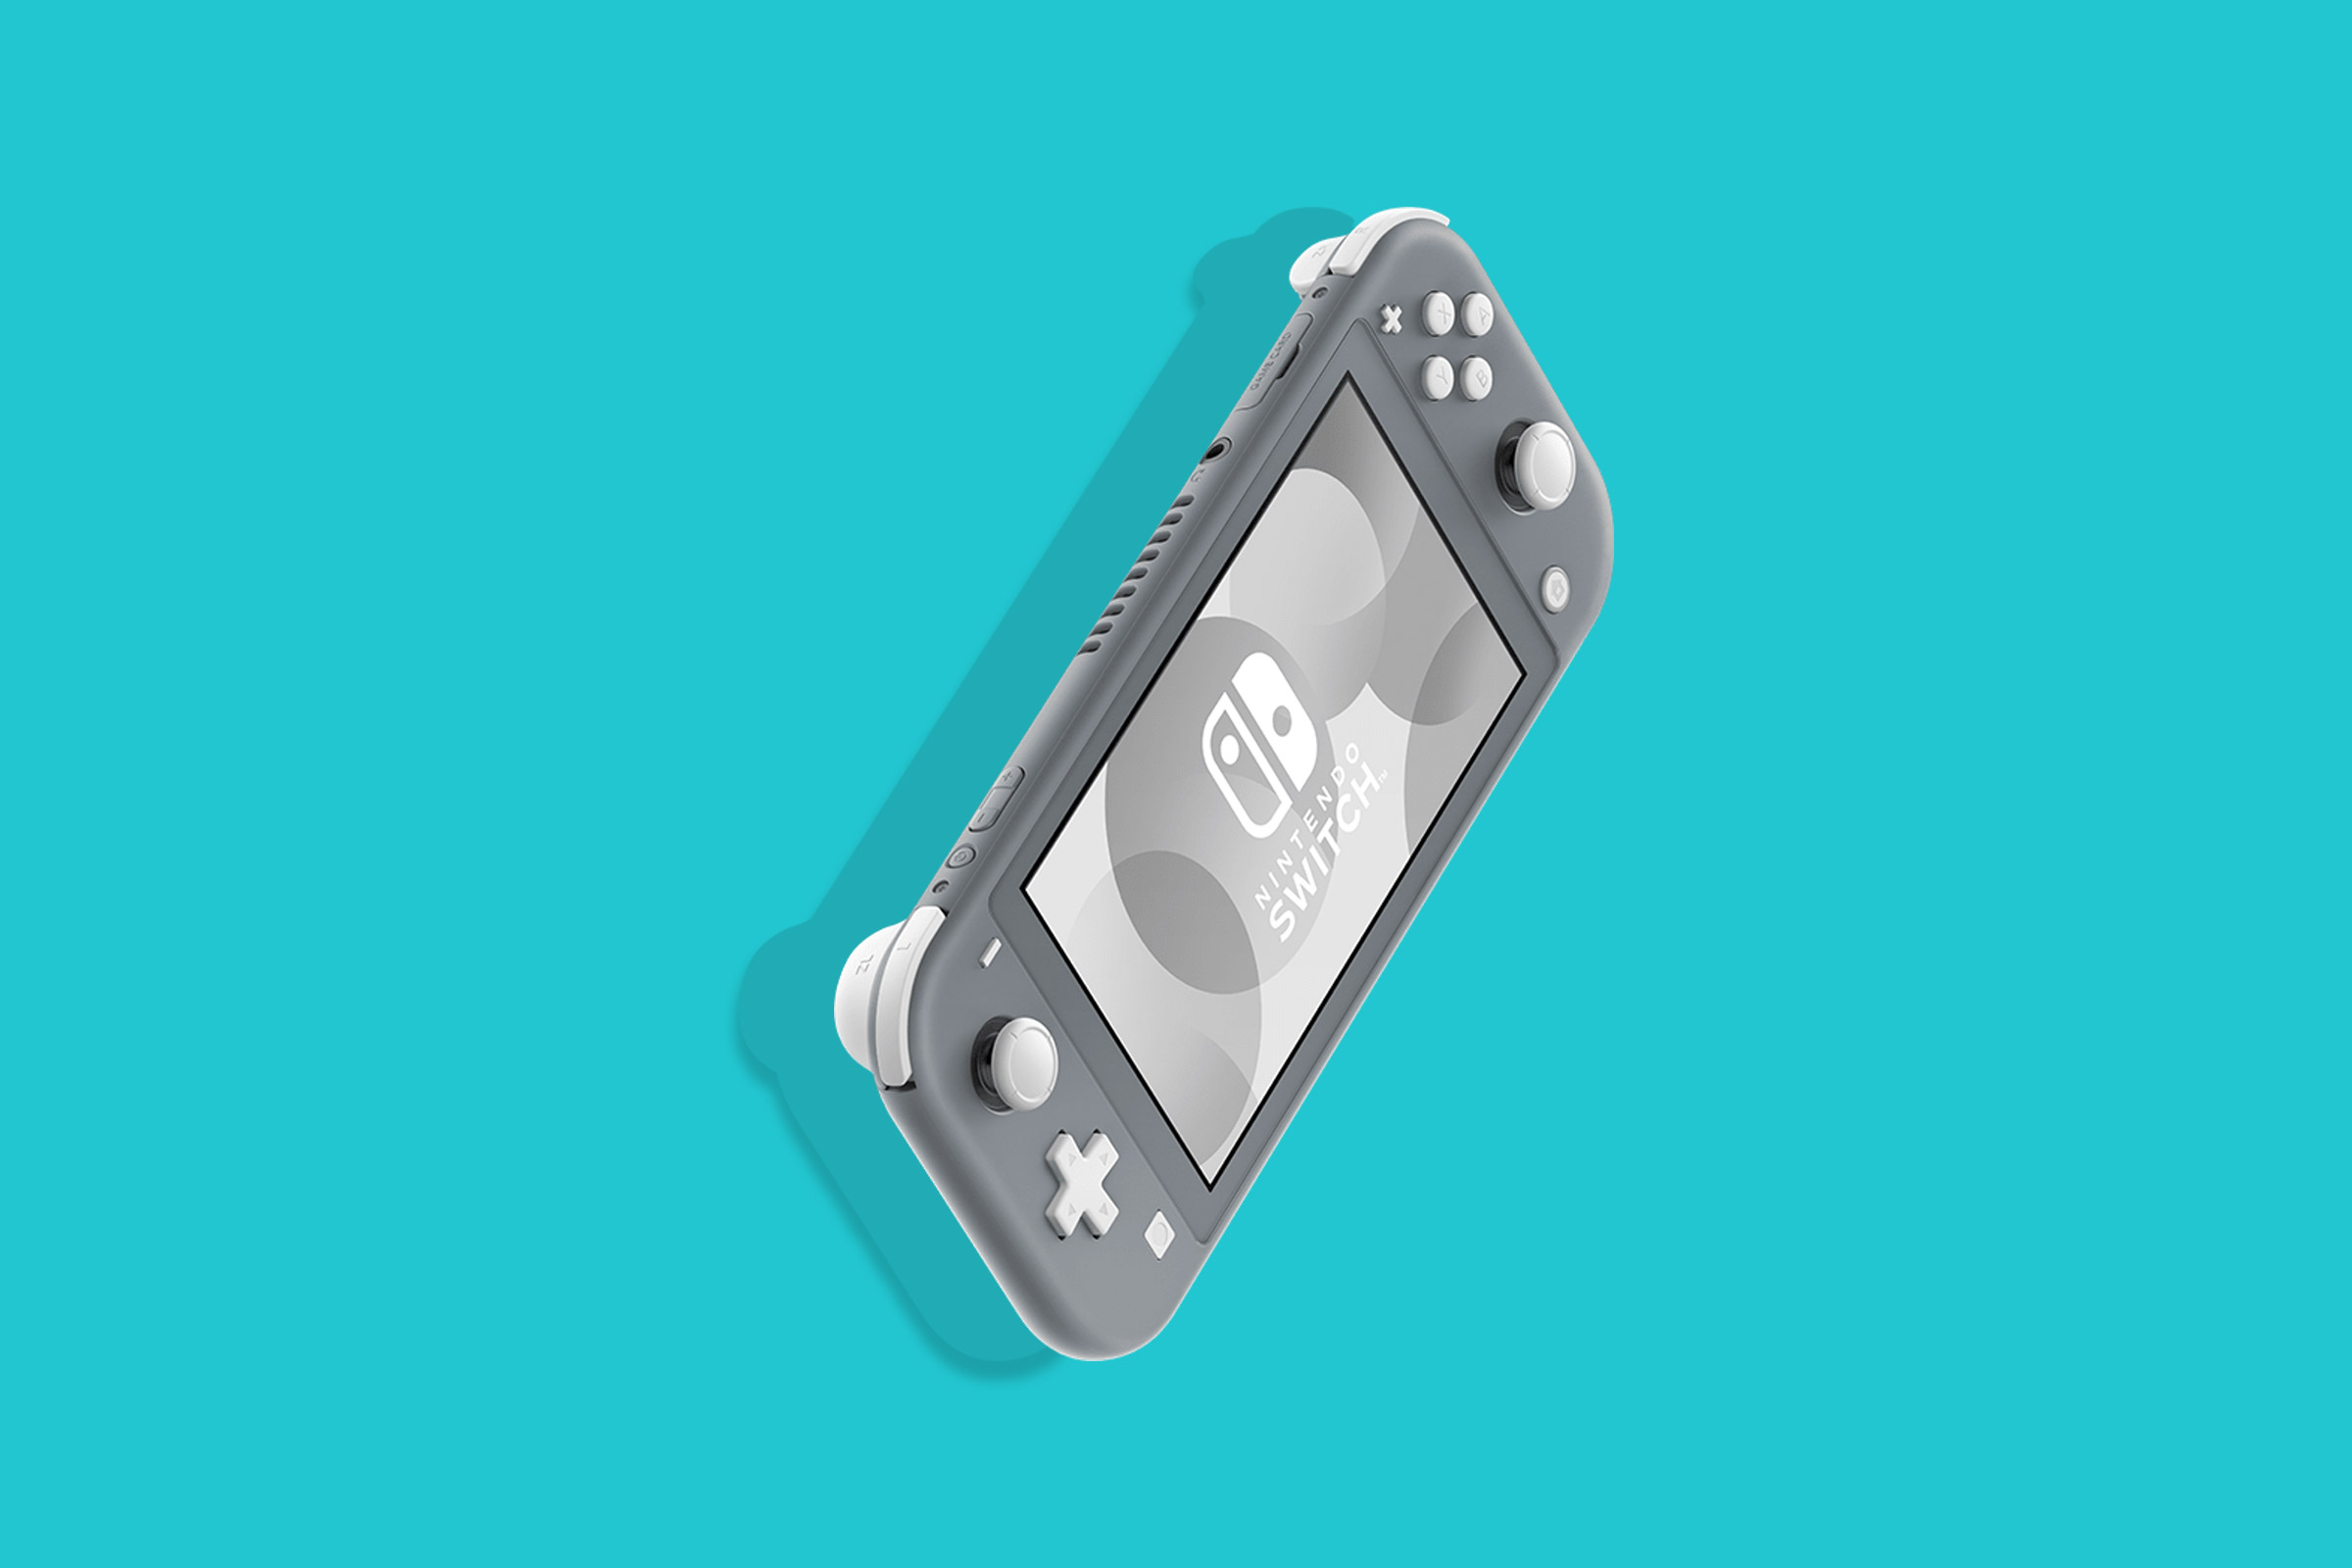 can you go on the internet on nintendo switch lite